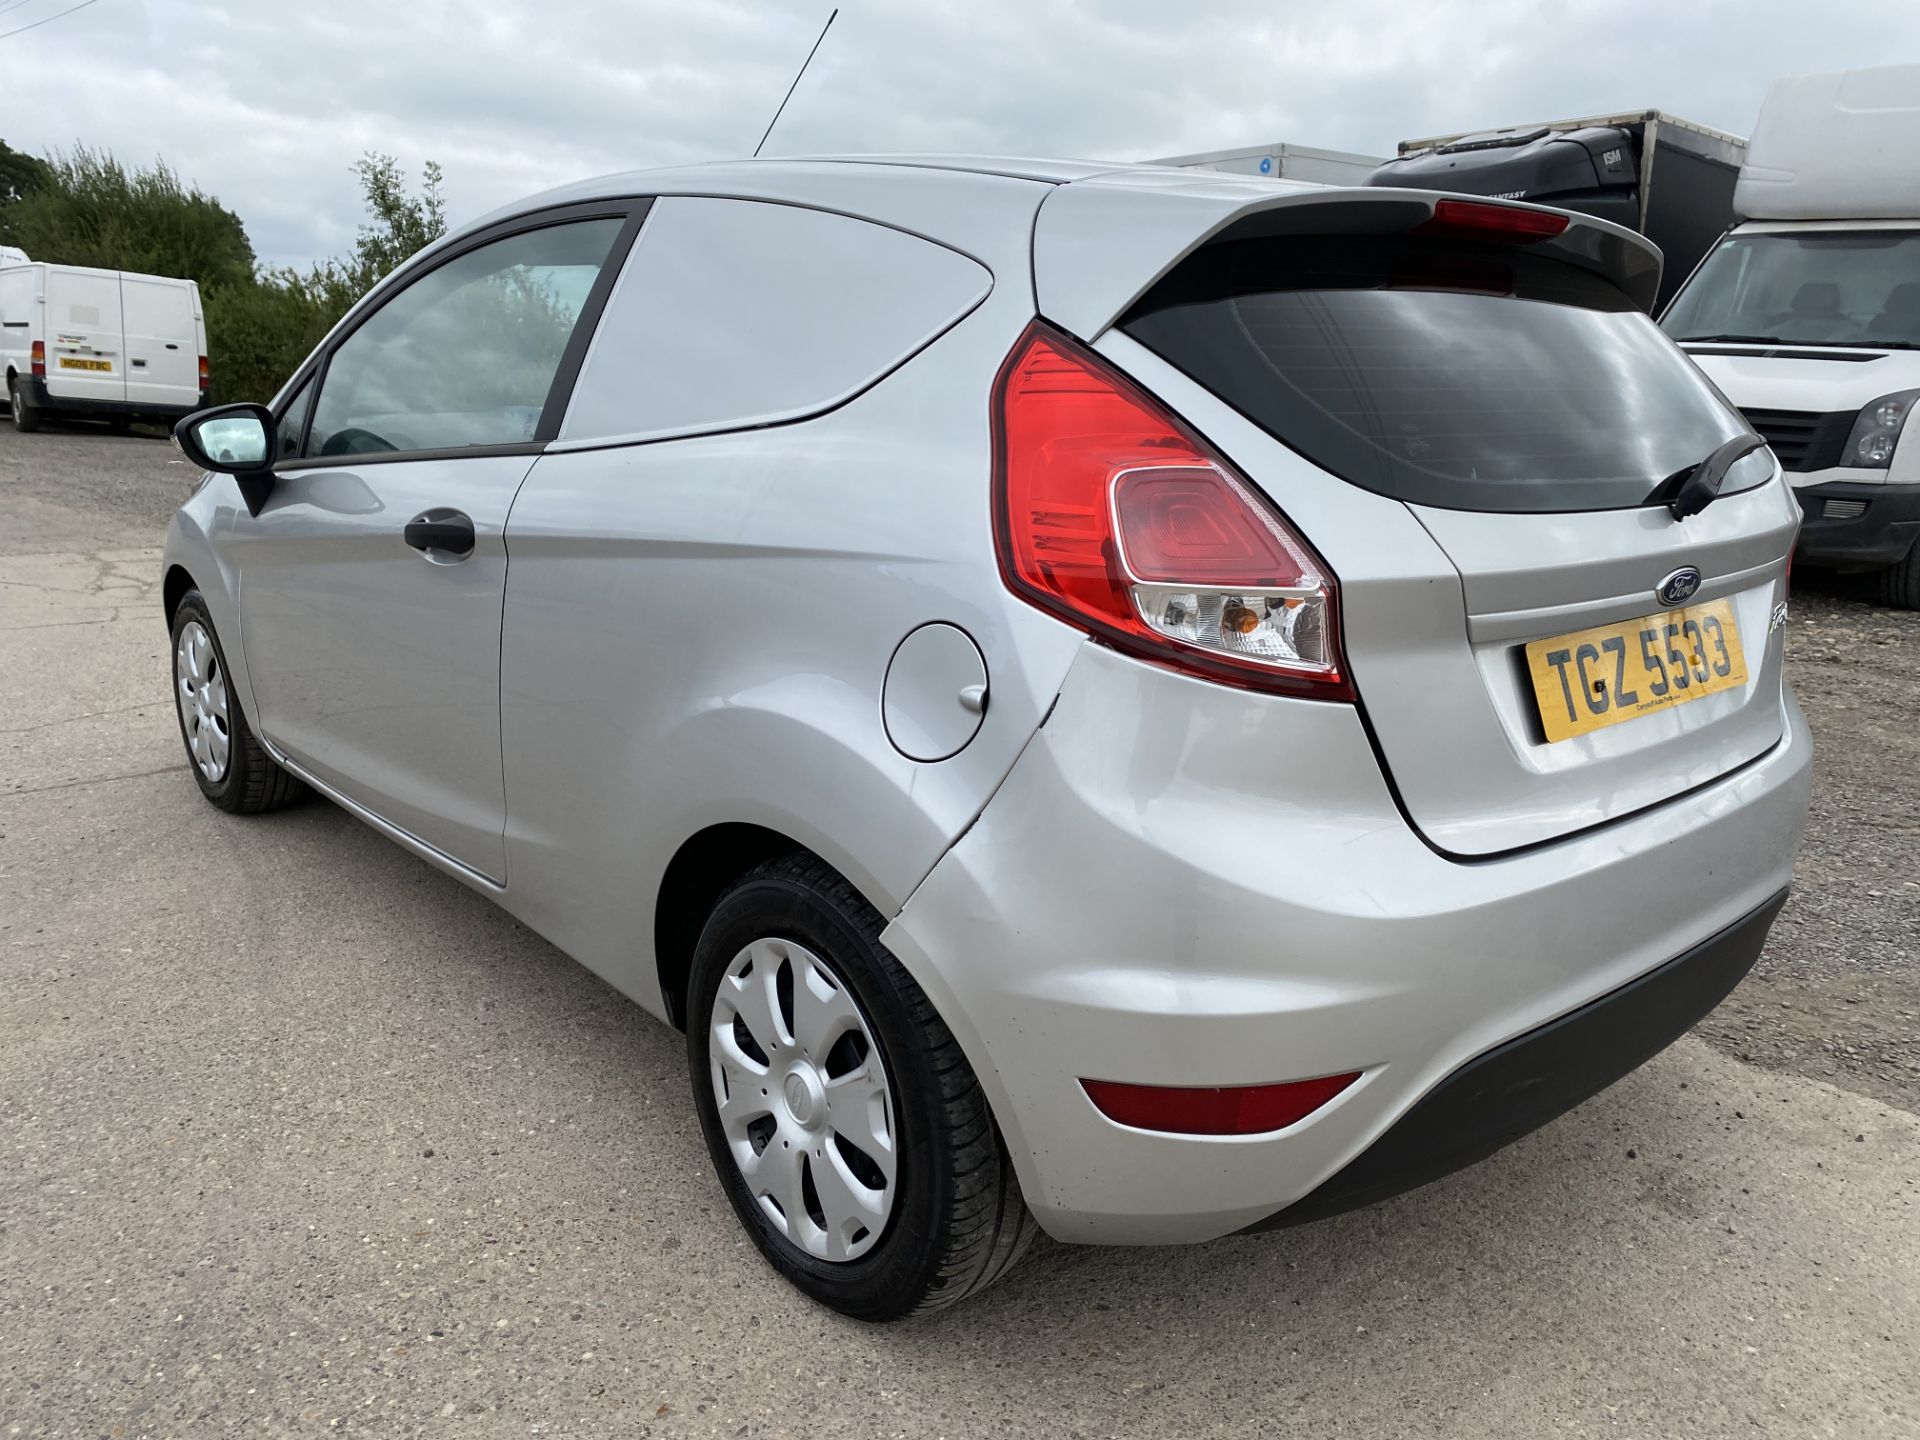 (On Sale) FORD FIESTA 1.5'TDCI' ECONETIC - (66 REG) 1 OWNER - AIR CON - SILVER -NEW SHAPE - LOOK!!!! - Image 8 of 20